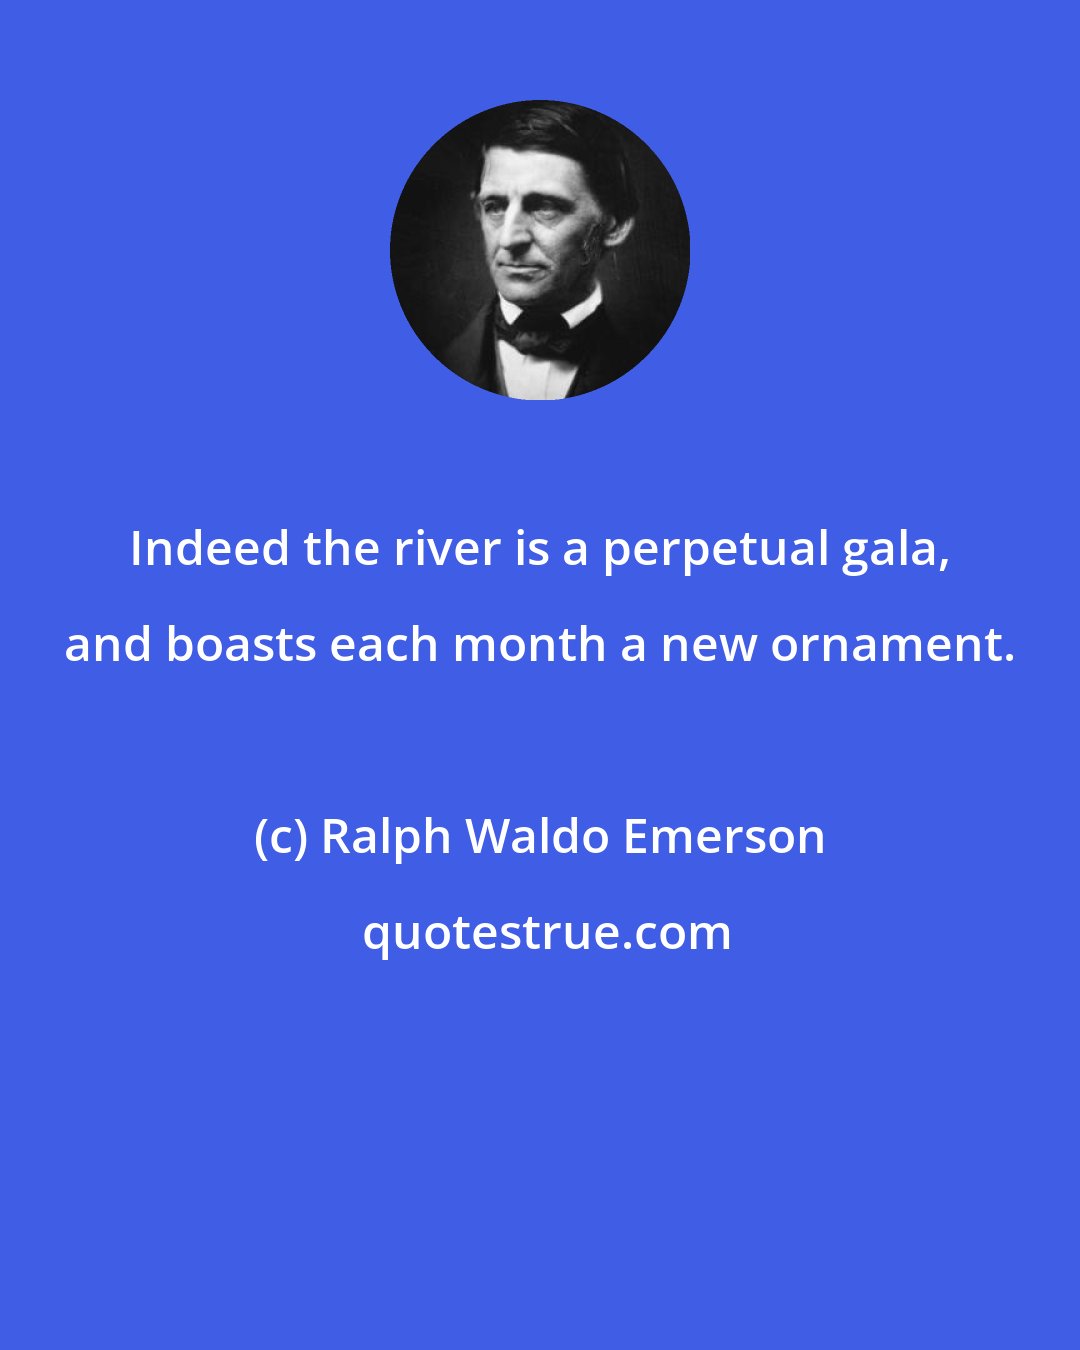 Ralph Waldo Emerson: Indeed the river is a perpetual gala, and boasts each month a new ornament.